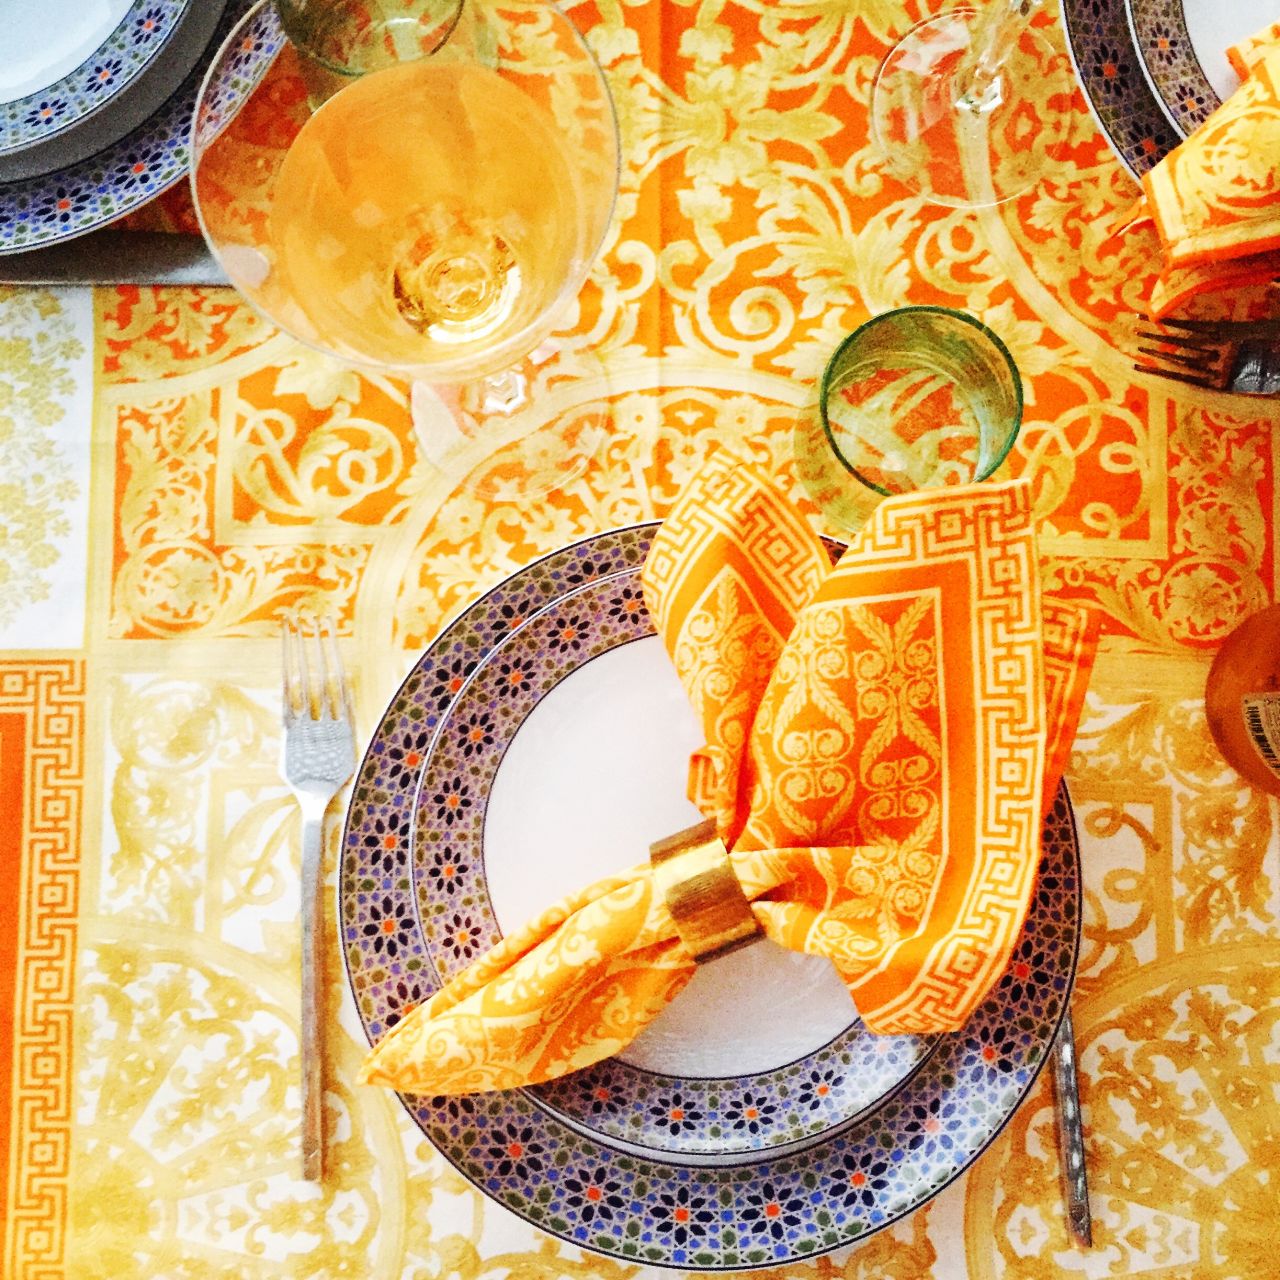 This table takes inspiration from the colors and patterns used across Morocco.